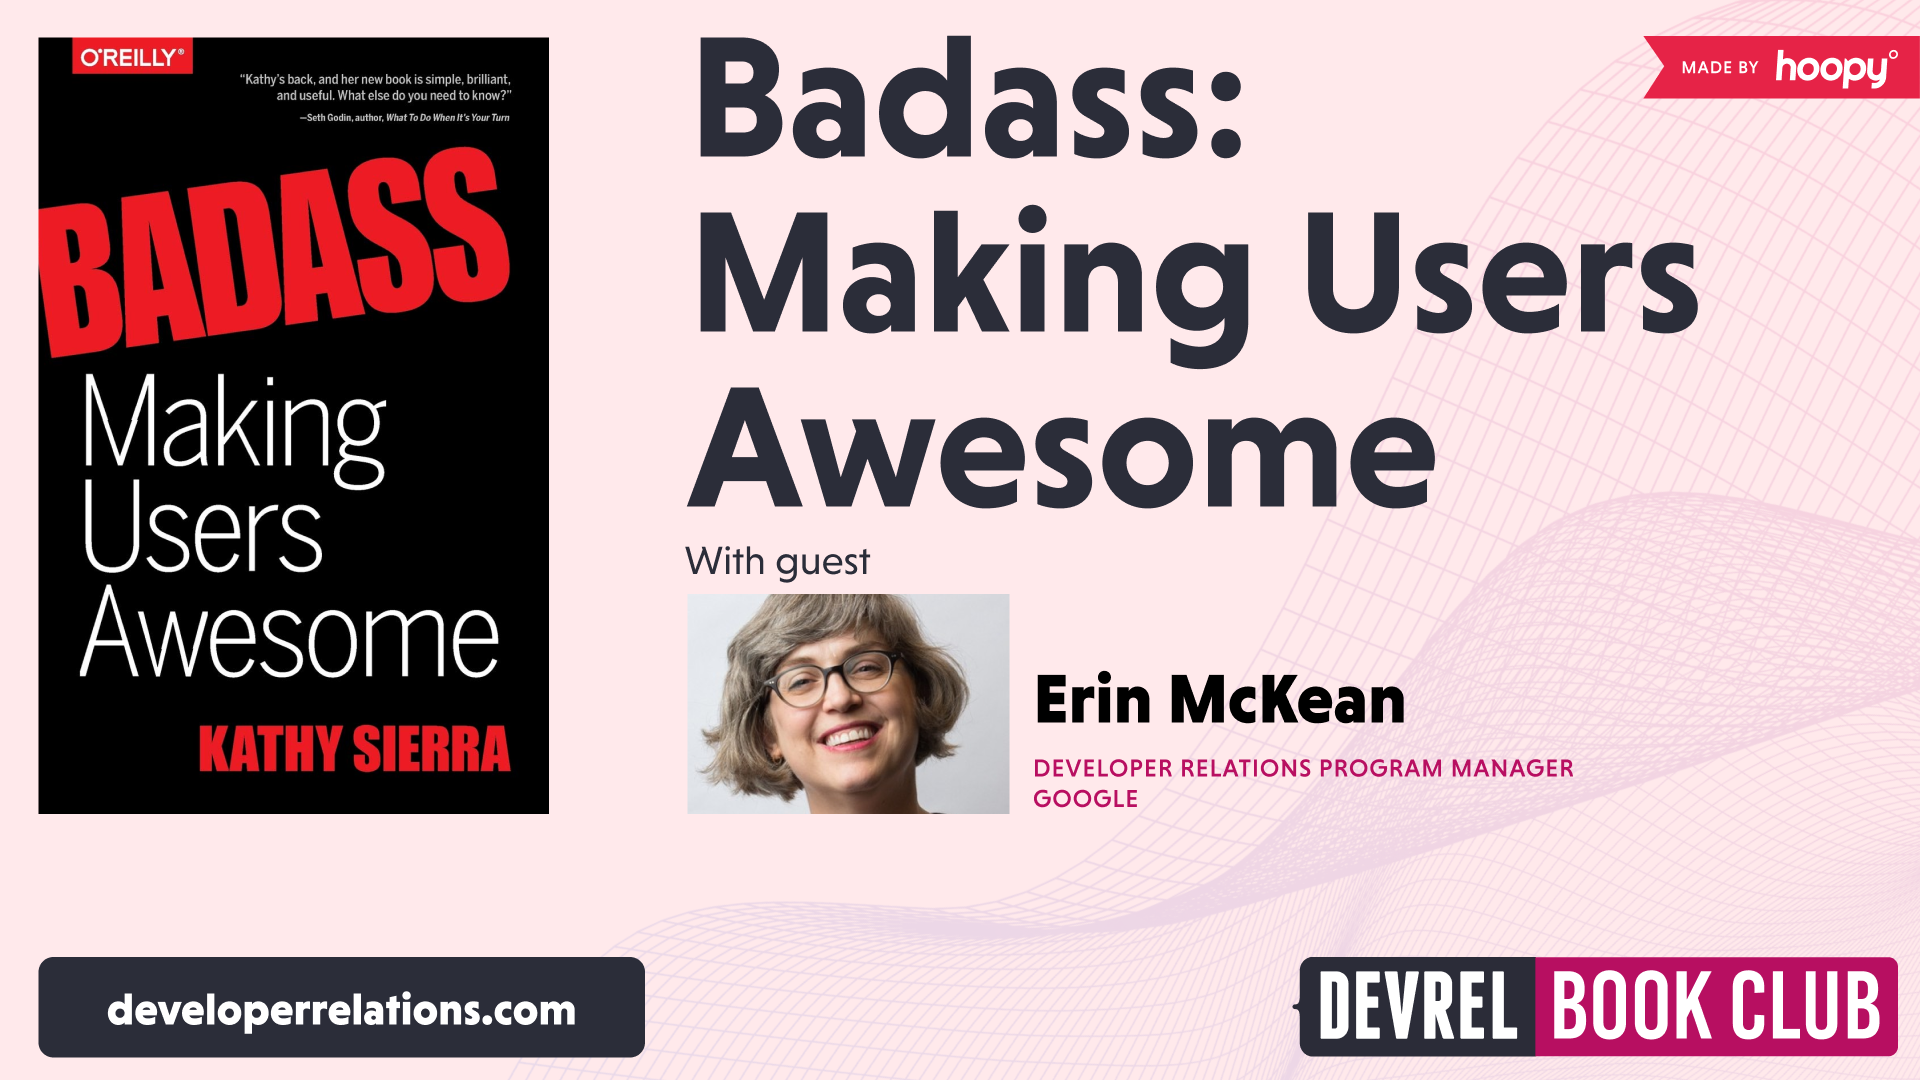 Badass: making users awesome with Erin McKean on the DevRel Book Club